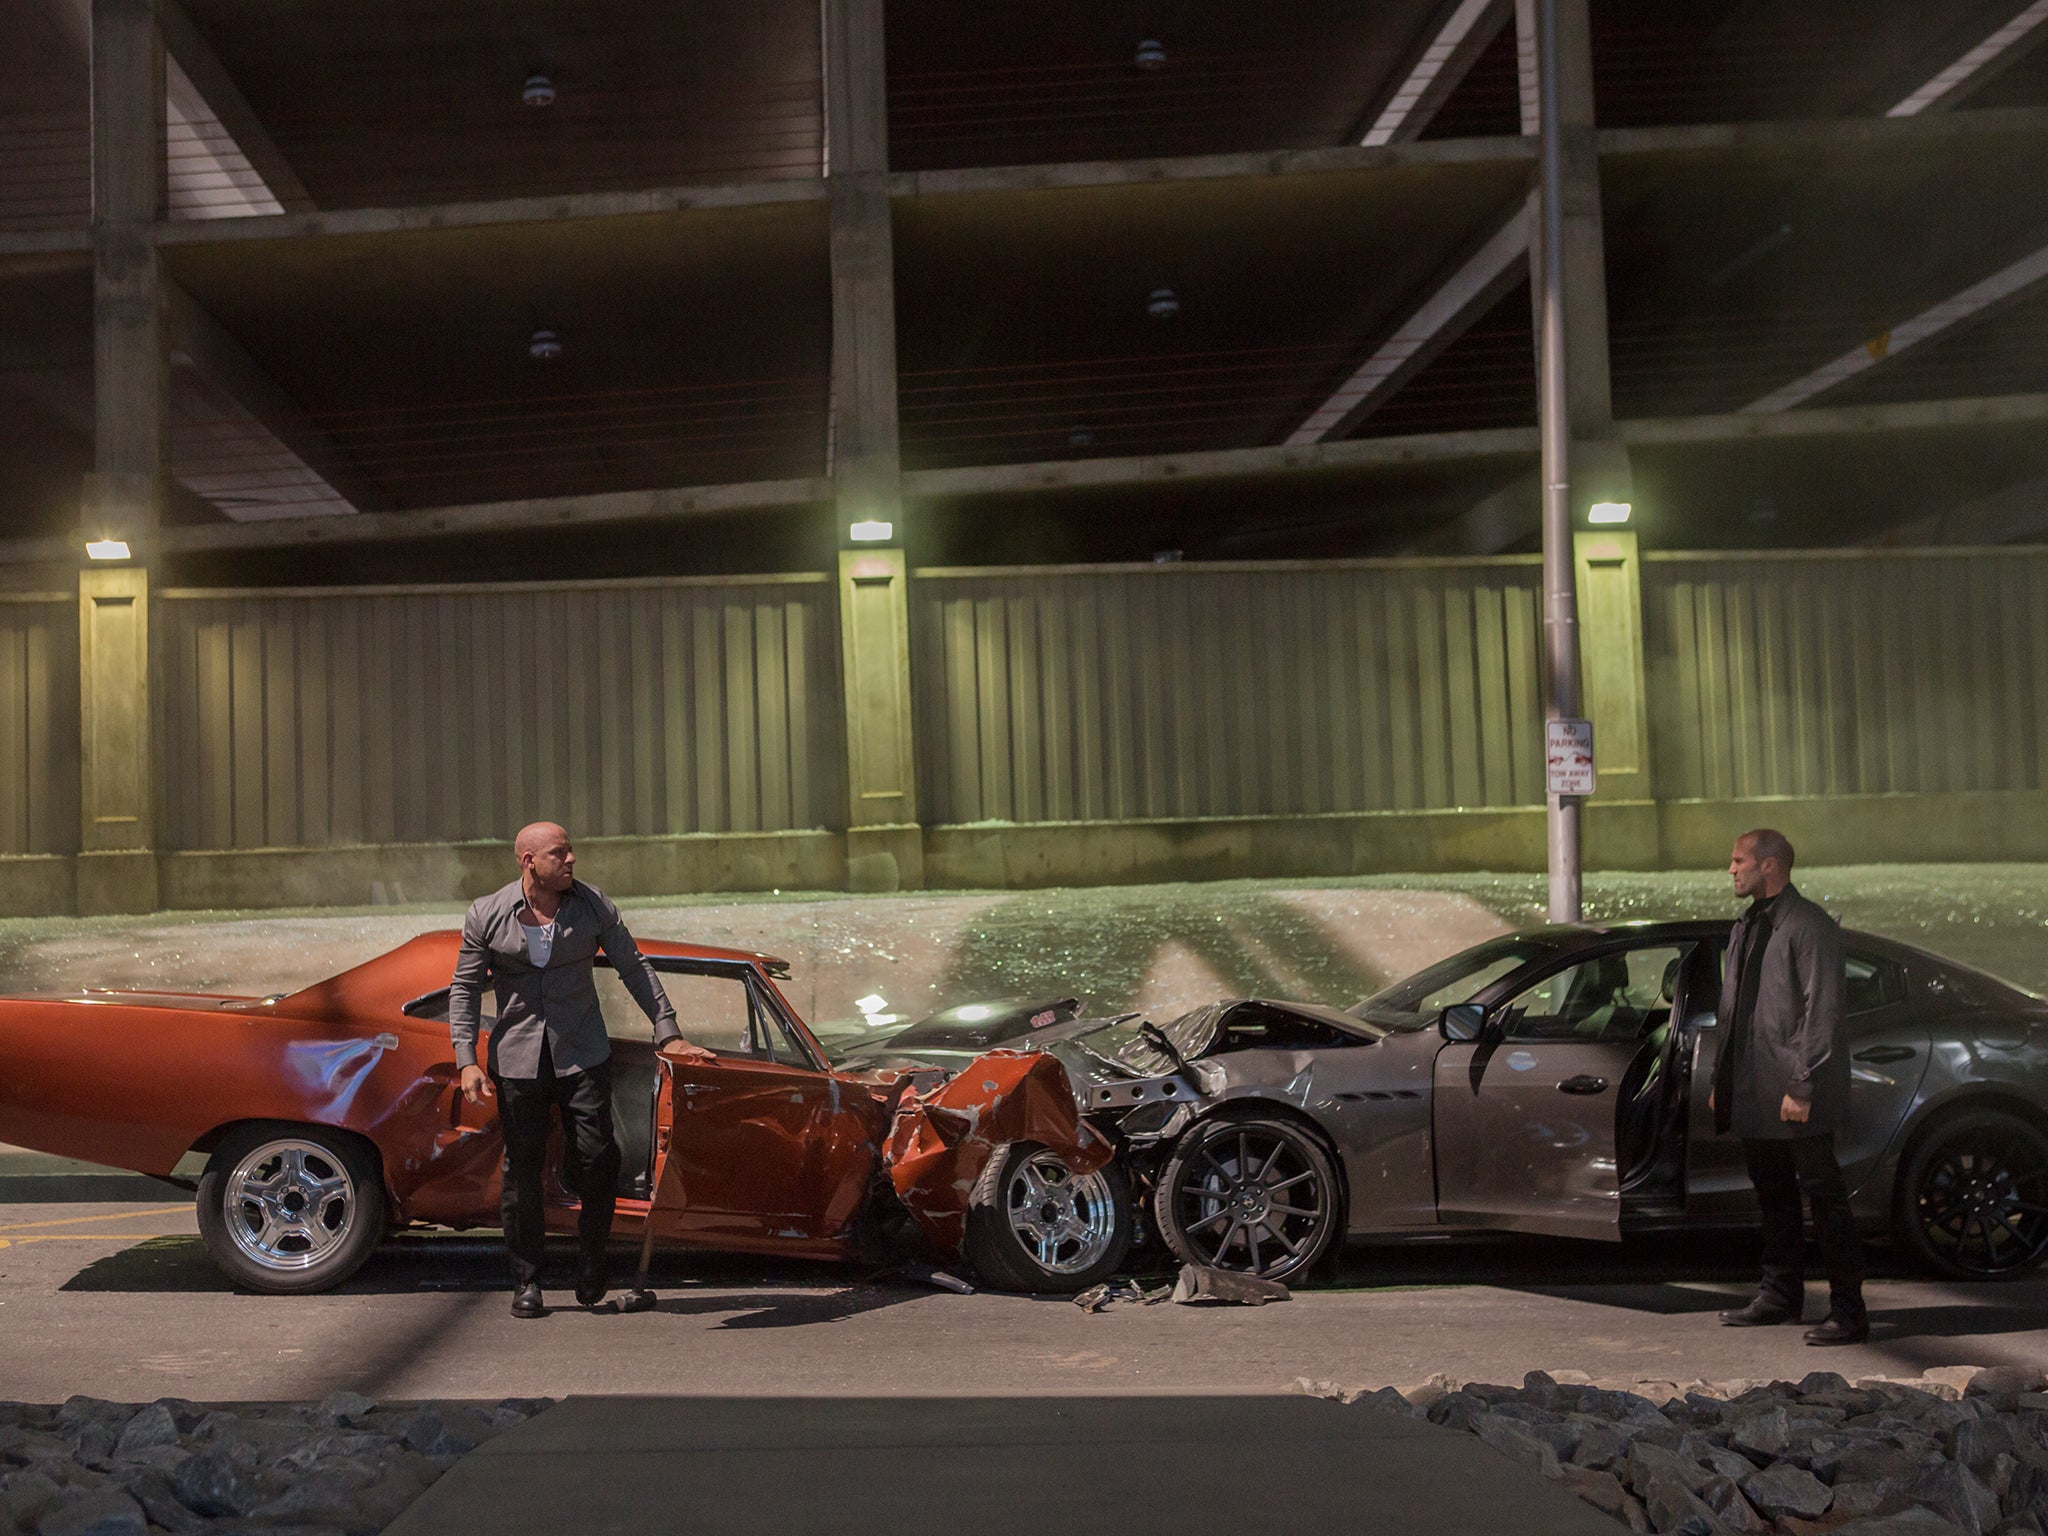 Life in the fast lane: a scene from ‘Furious 7’